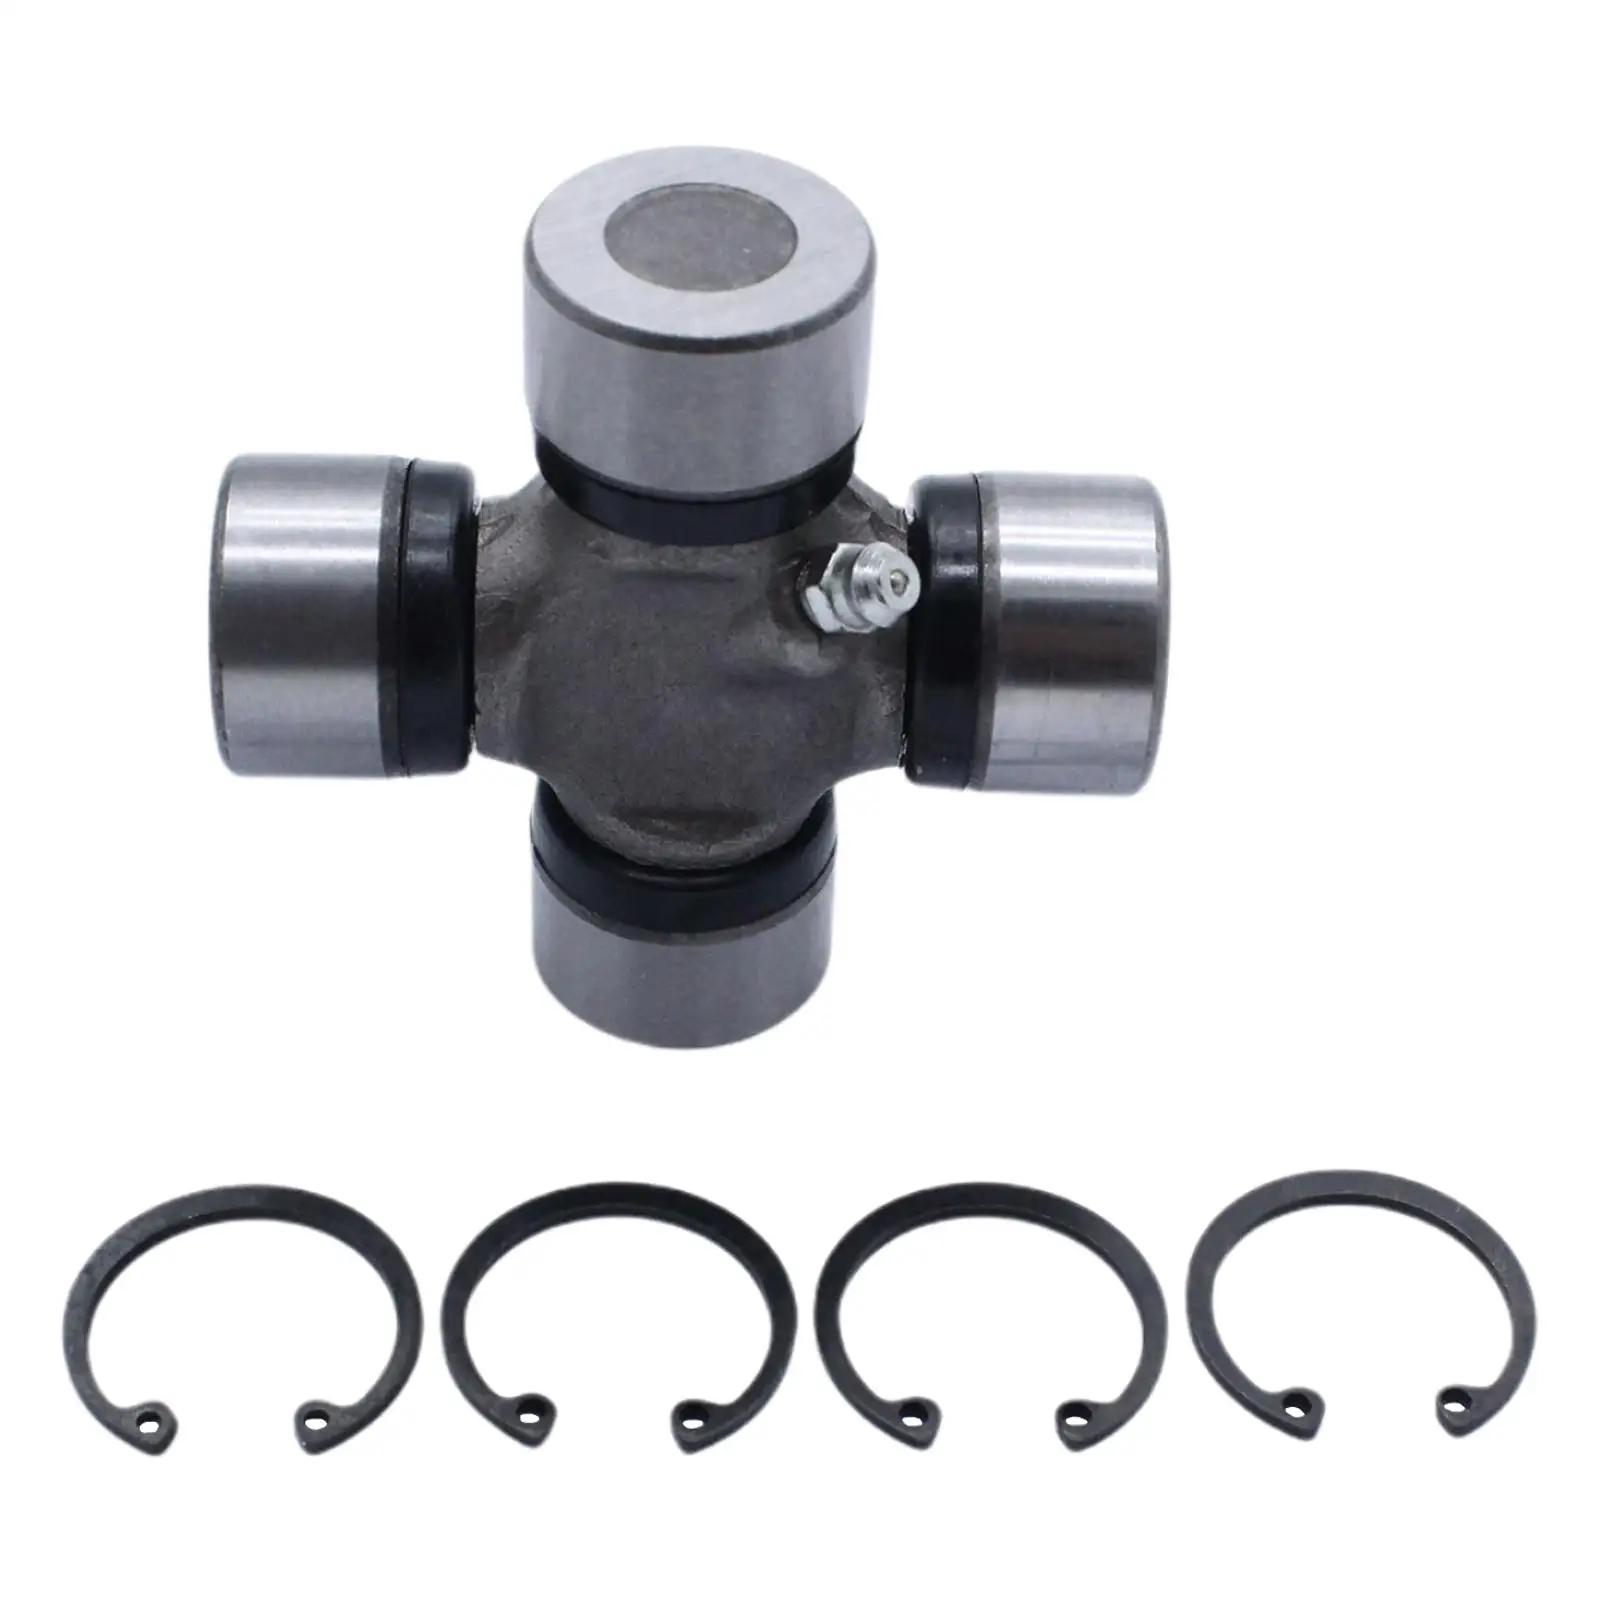 Automobile Front Joint Cross Bearing 37125-3x00A Metal U-Joints Accessories Replace Fit for D40 2.5Dci yd25Ddti